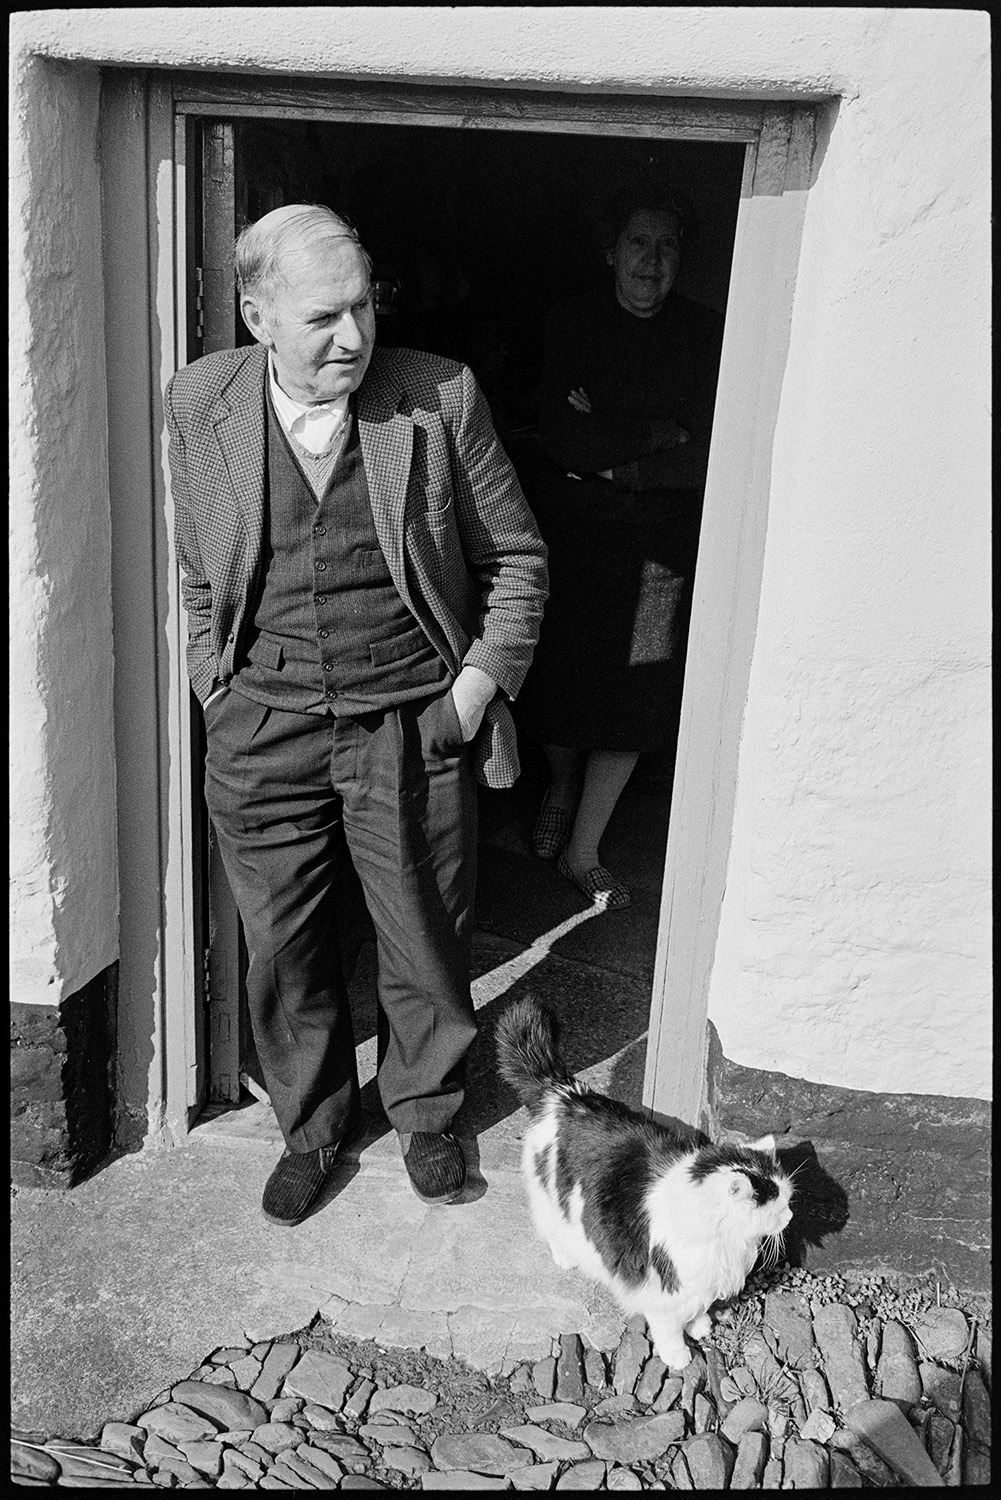 Woman and man at door with cat. 
[Mr Vanstone stood in his doorway with his cat at Monkokehampton. The pathway outside the house is cobbled. Mrs Vanstone can be seen inside the house.]